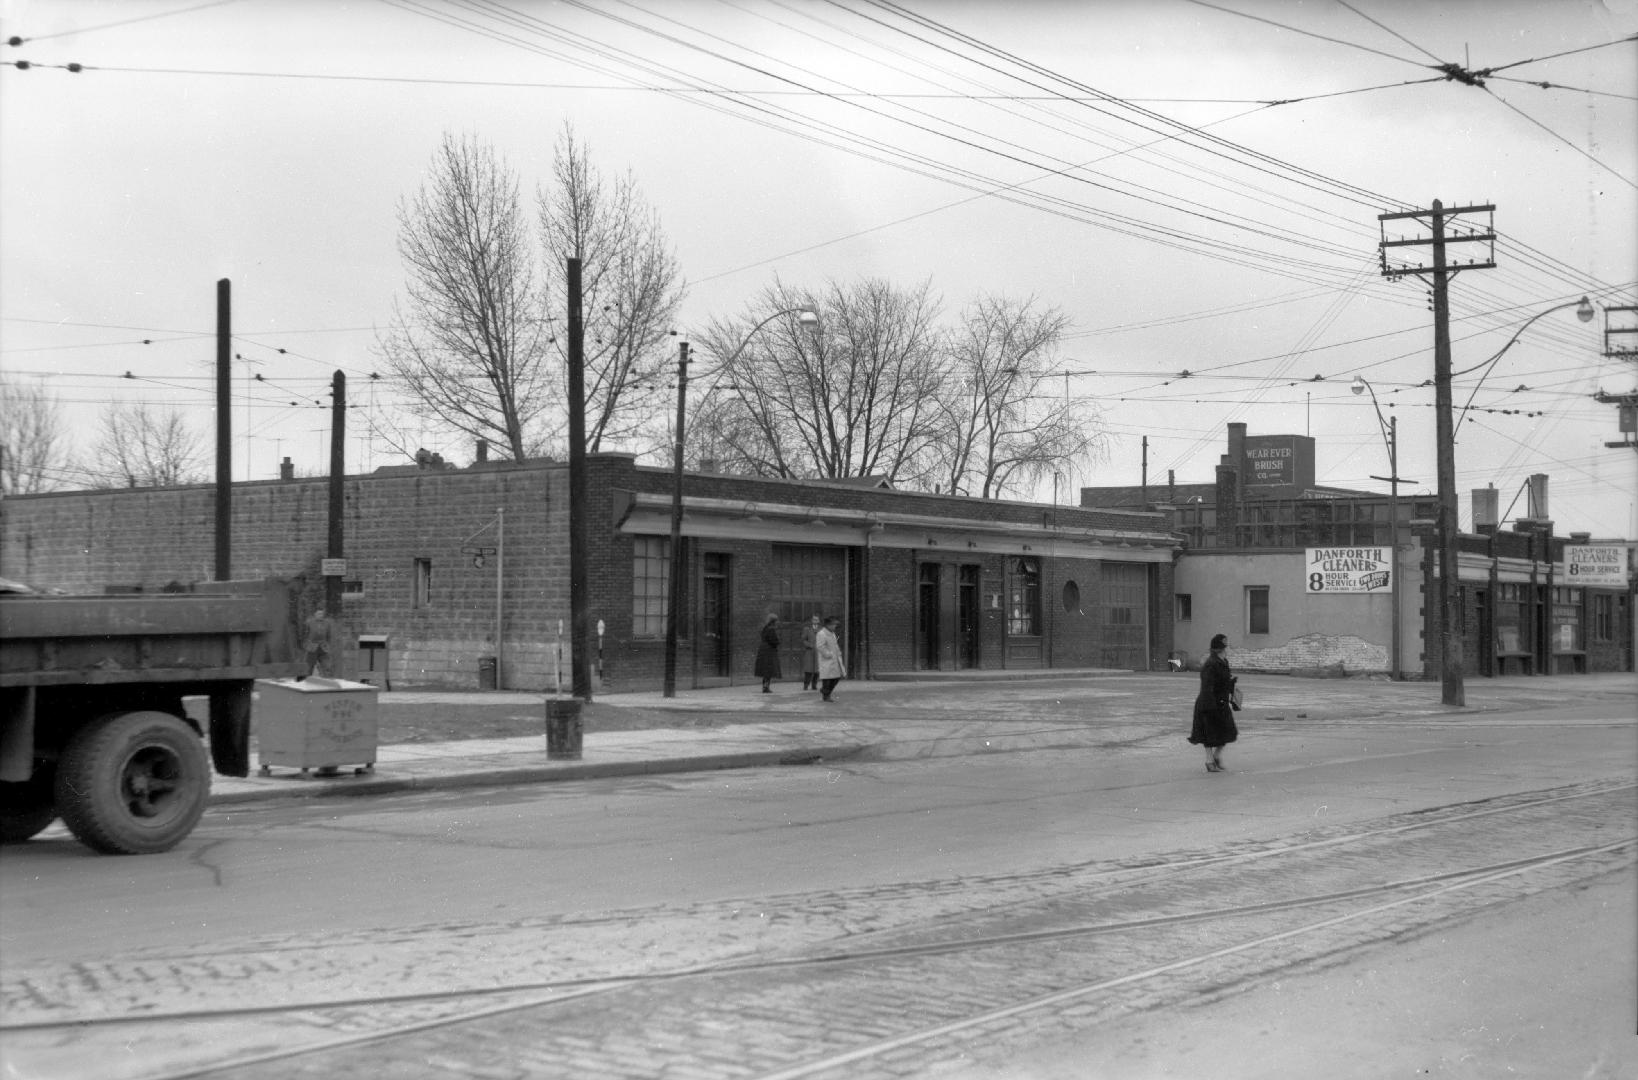 Danforth Bus Lines, garage (and terminal), Danforth Avenue, south side, between Kelvin & Luttrell Aves